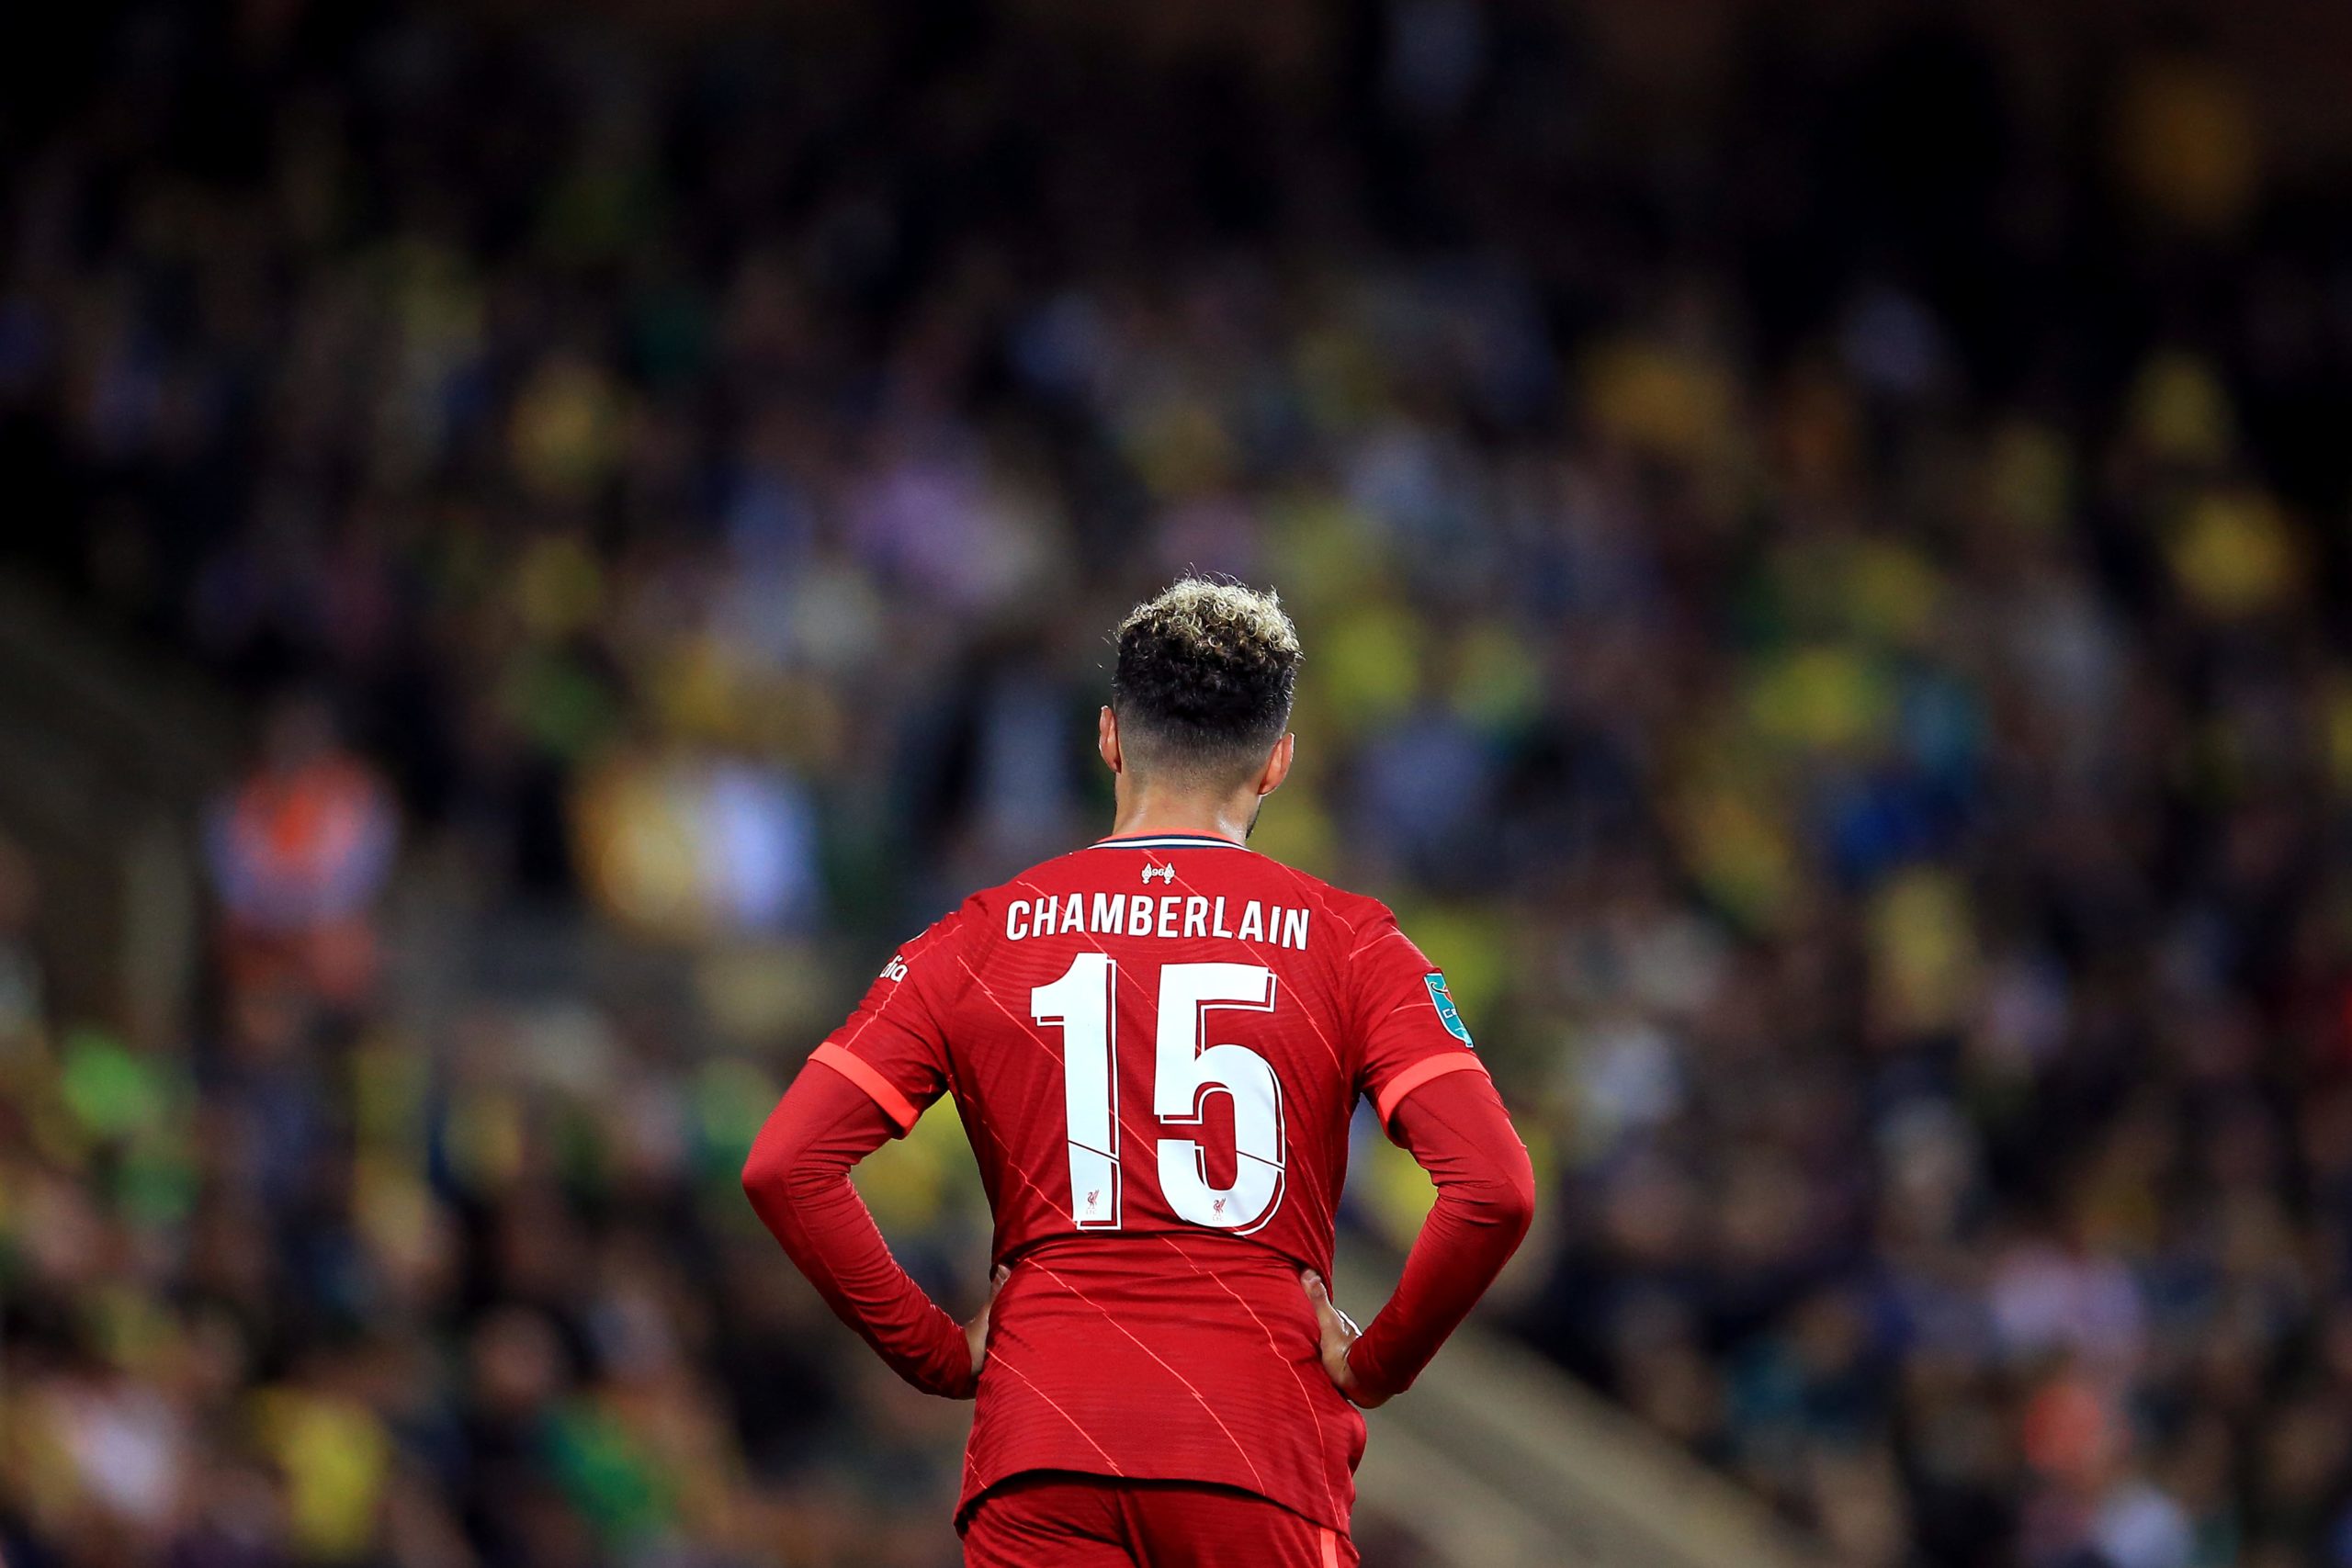 NORWICH, ENGLAND - SEPTEMBER 21: Alex Oxlade-Chamberlain of Liverpool during the Carabao Cup Third Round match between Norwich City and Liverpool at Carrow Road on September 21, 2021 in Norwich, England. (Photo by Stephen Pond/Getty Images)